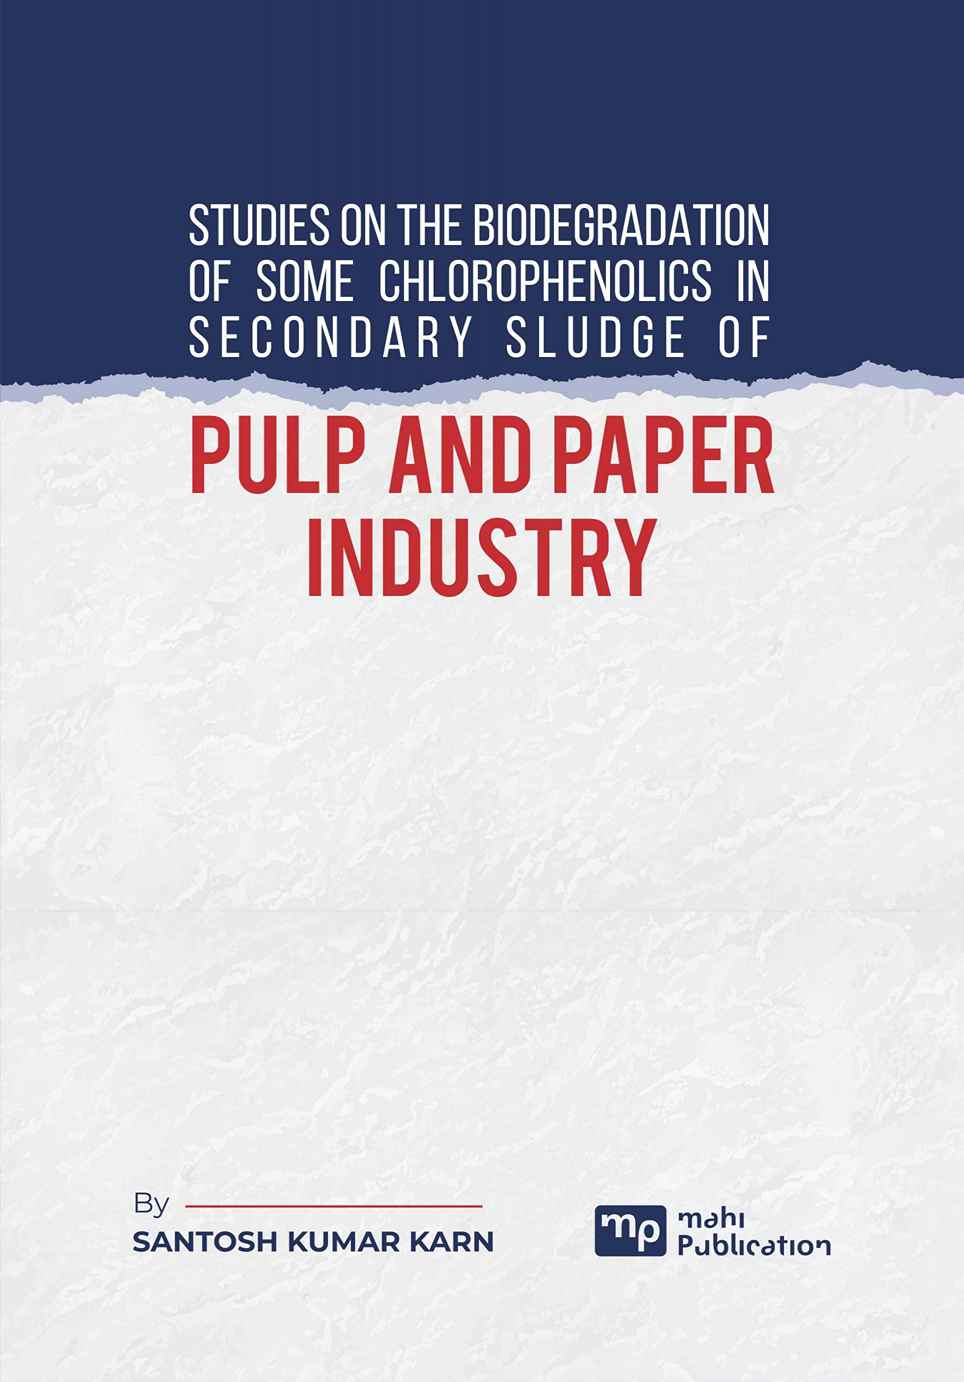 Studies on the Biodegradation of Some Chlorophenolics in Secondary Sludge of Pulp and Paper Industry